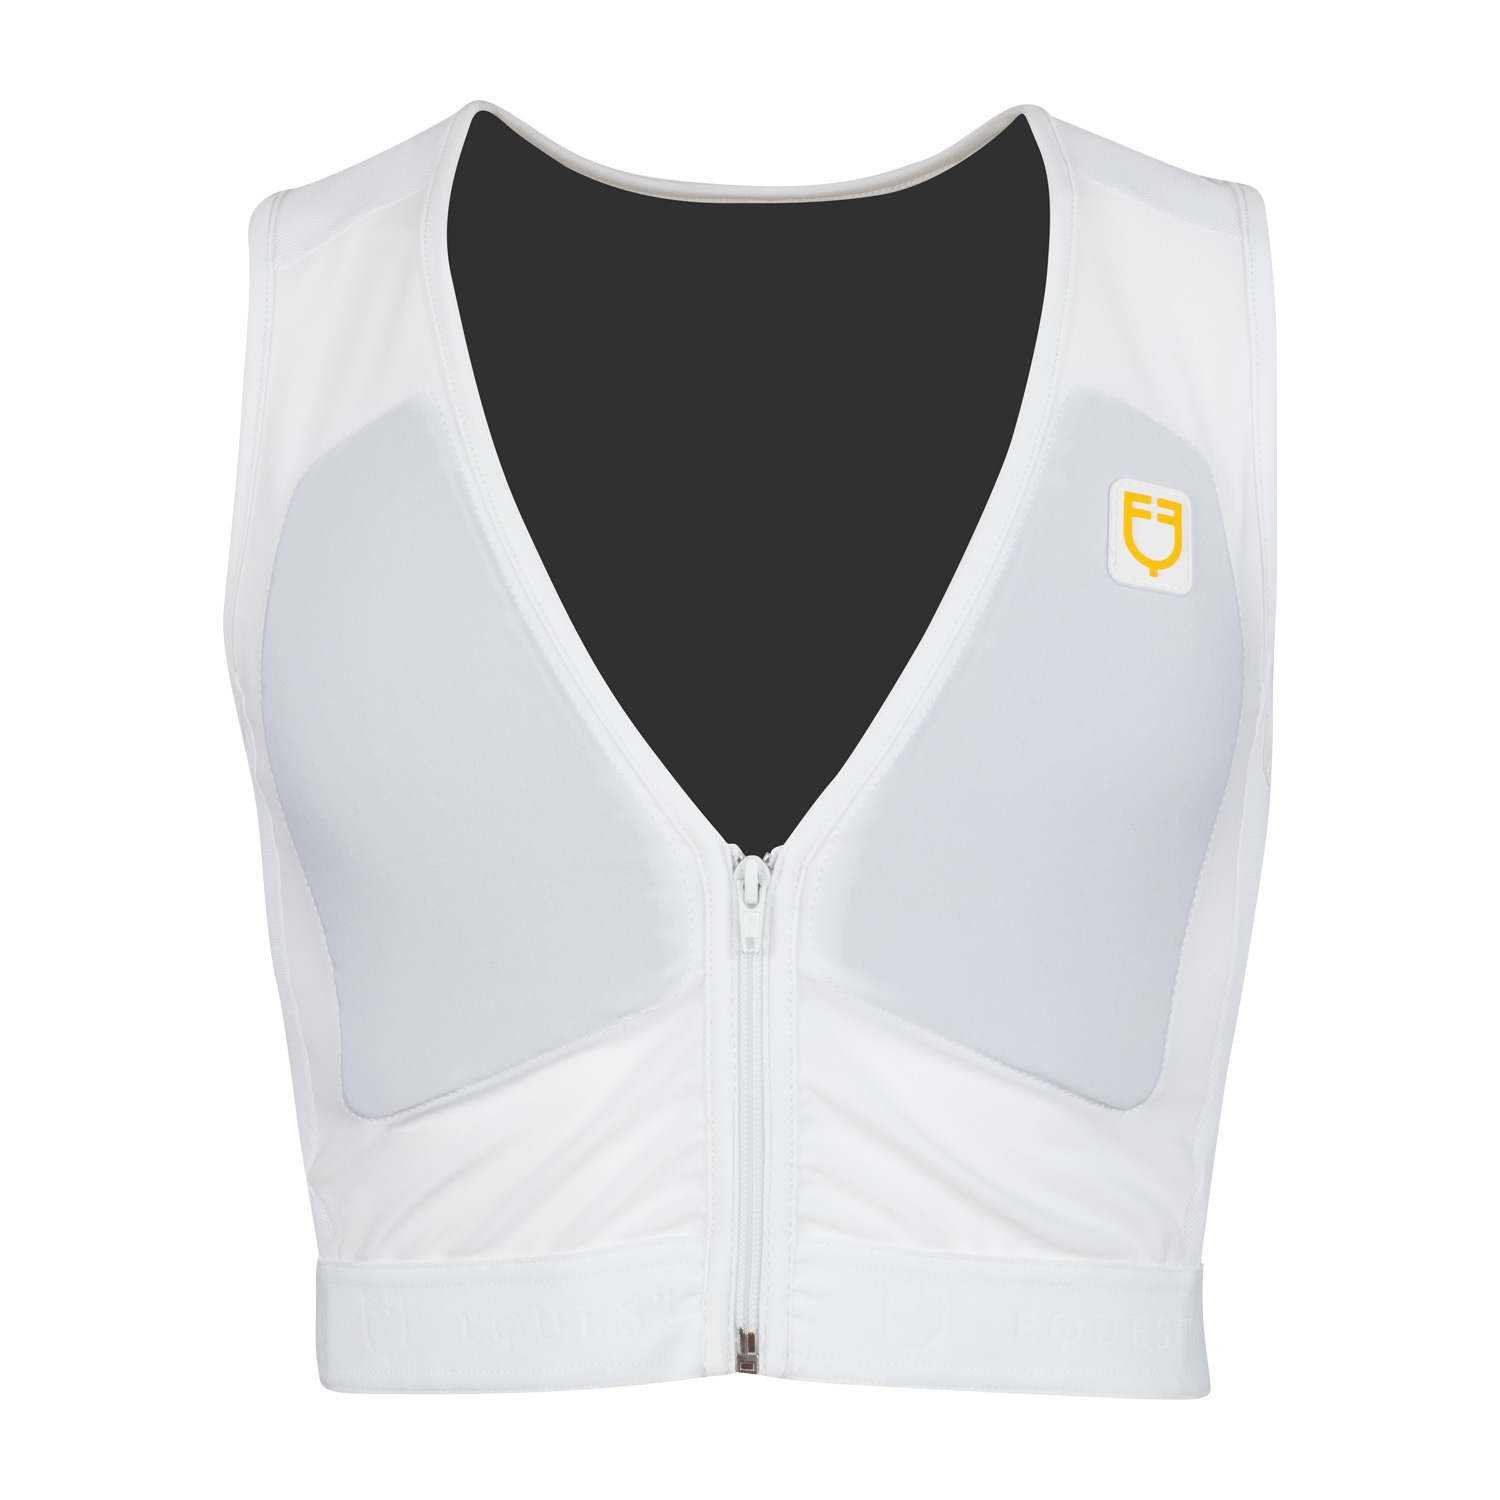 Protector Comptetition Vest